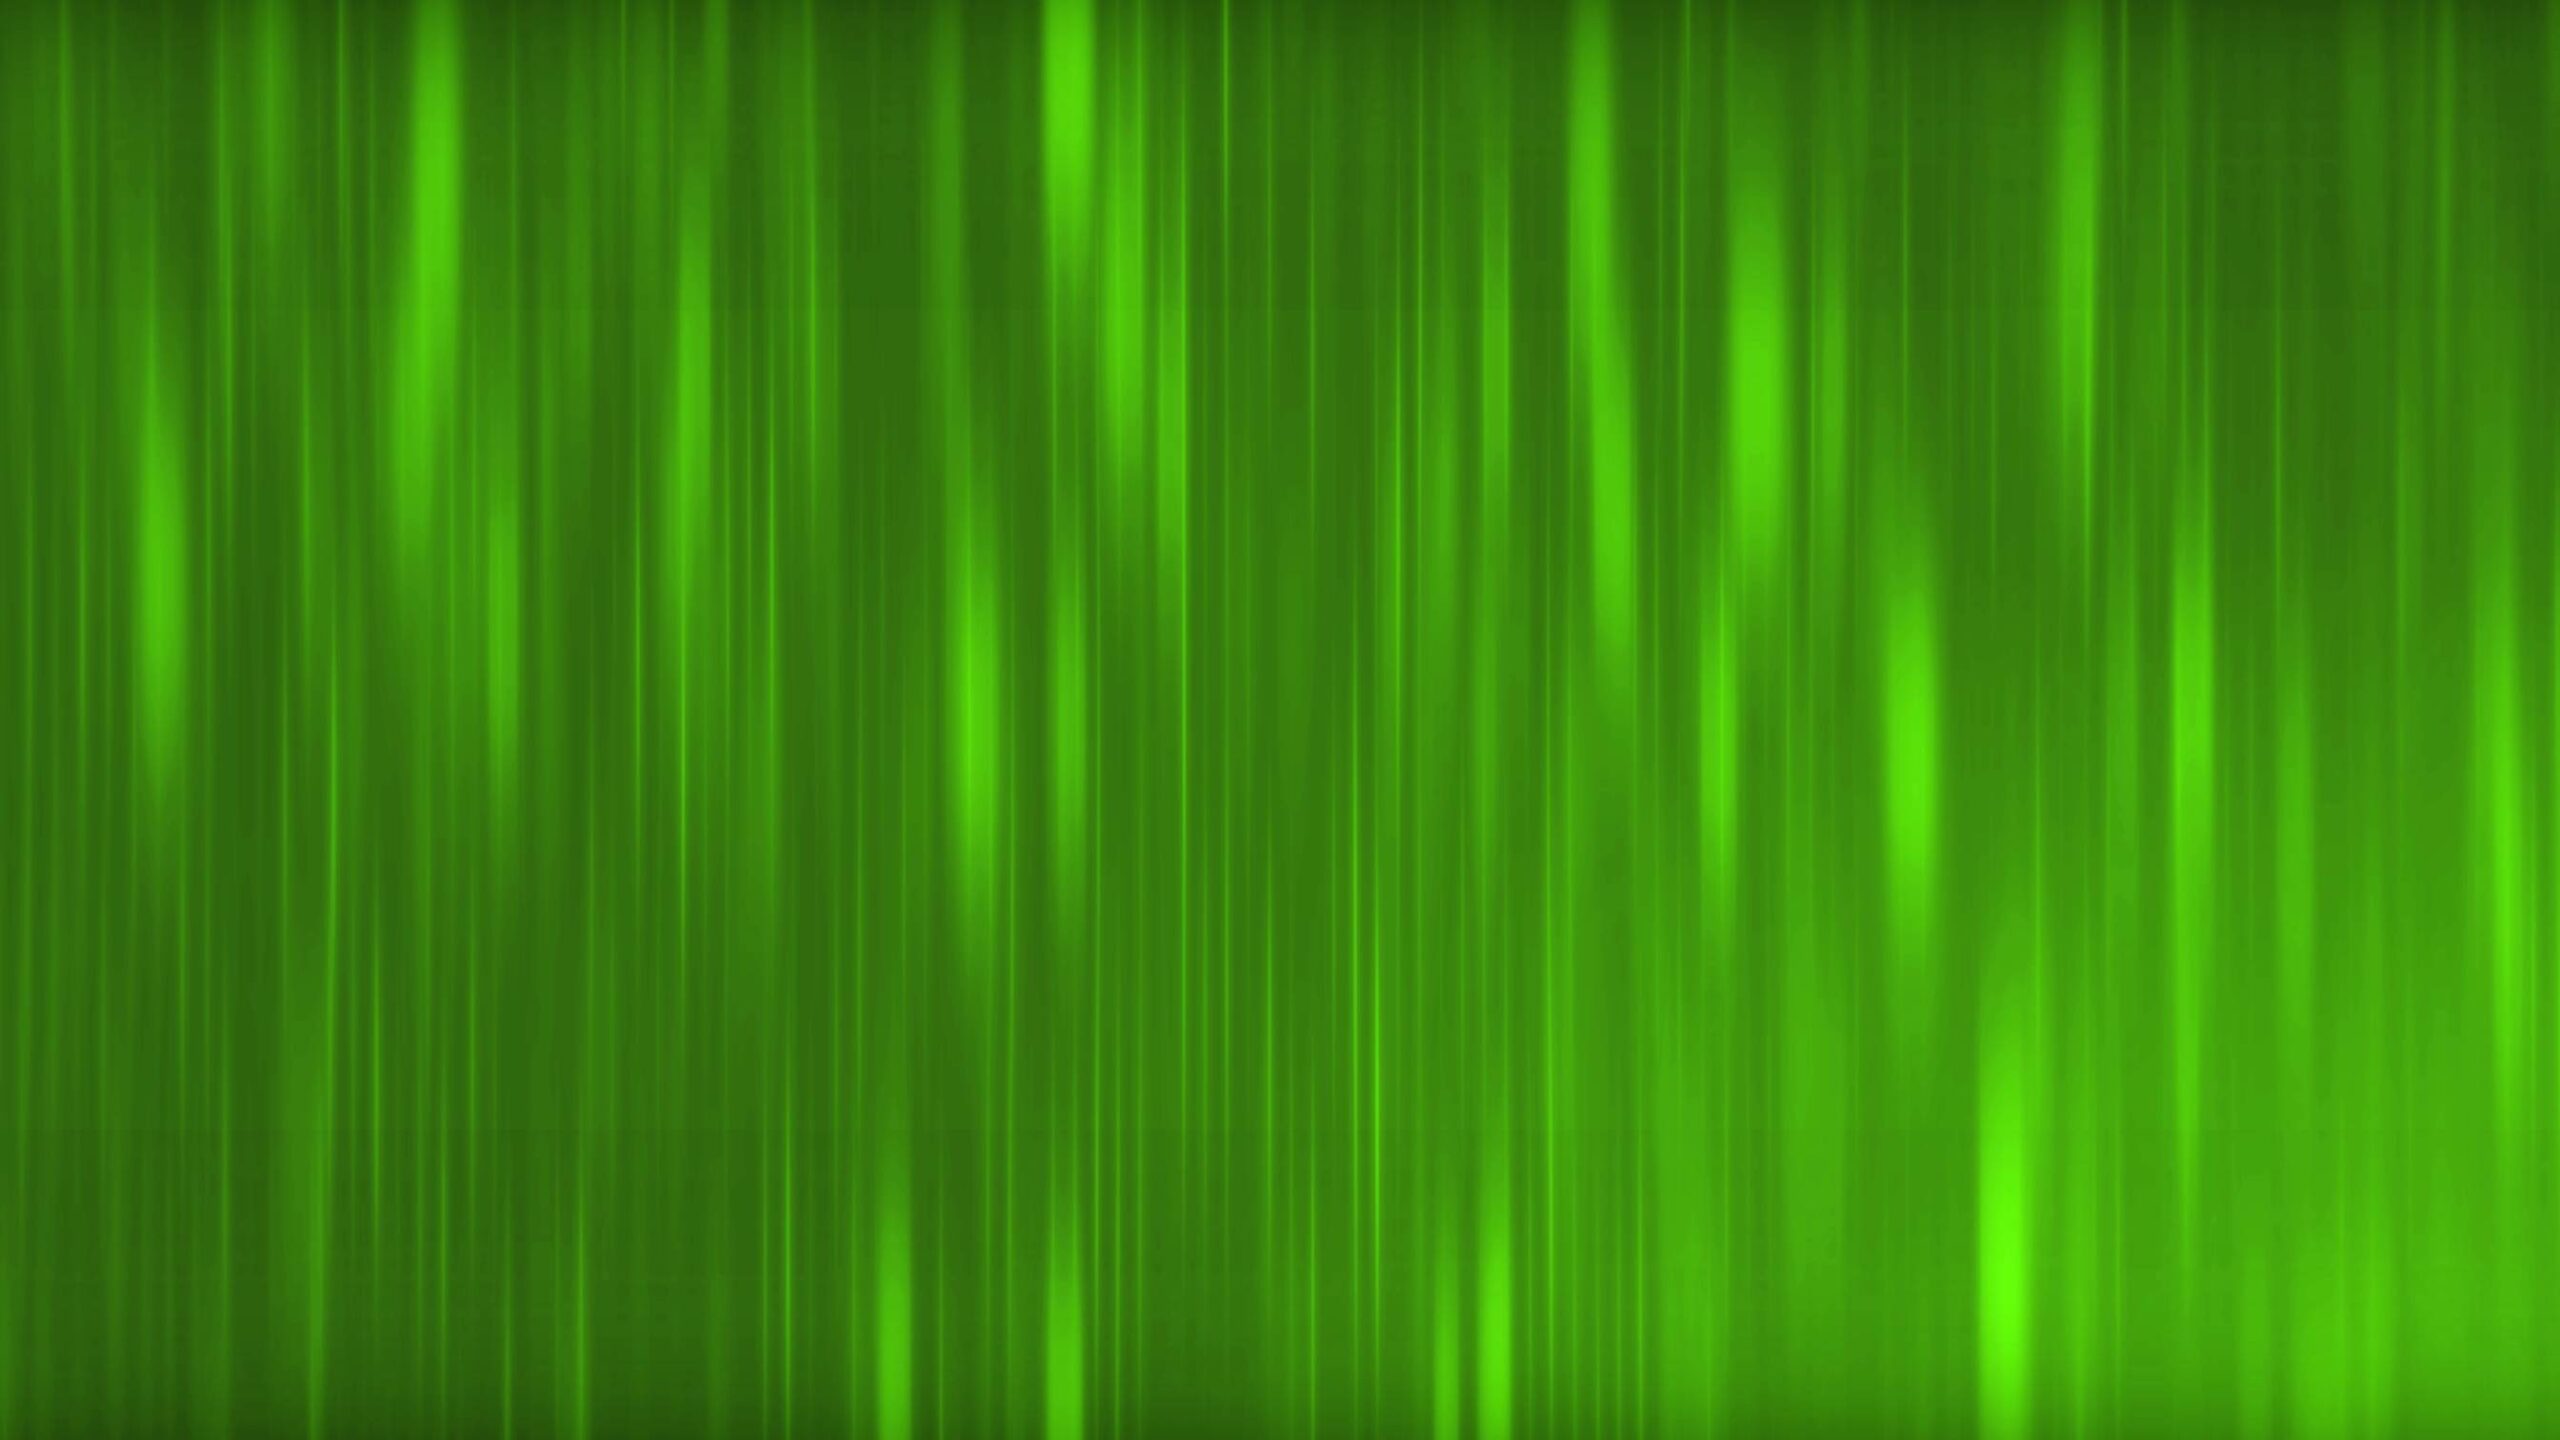 4K Glowing Green Streaks Screensaver || UHD Free To Use Motion Background || Free Download